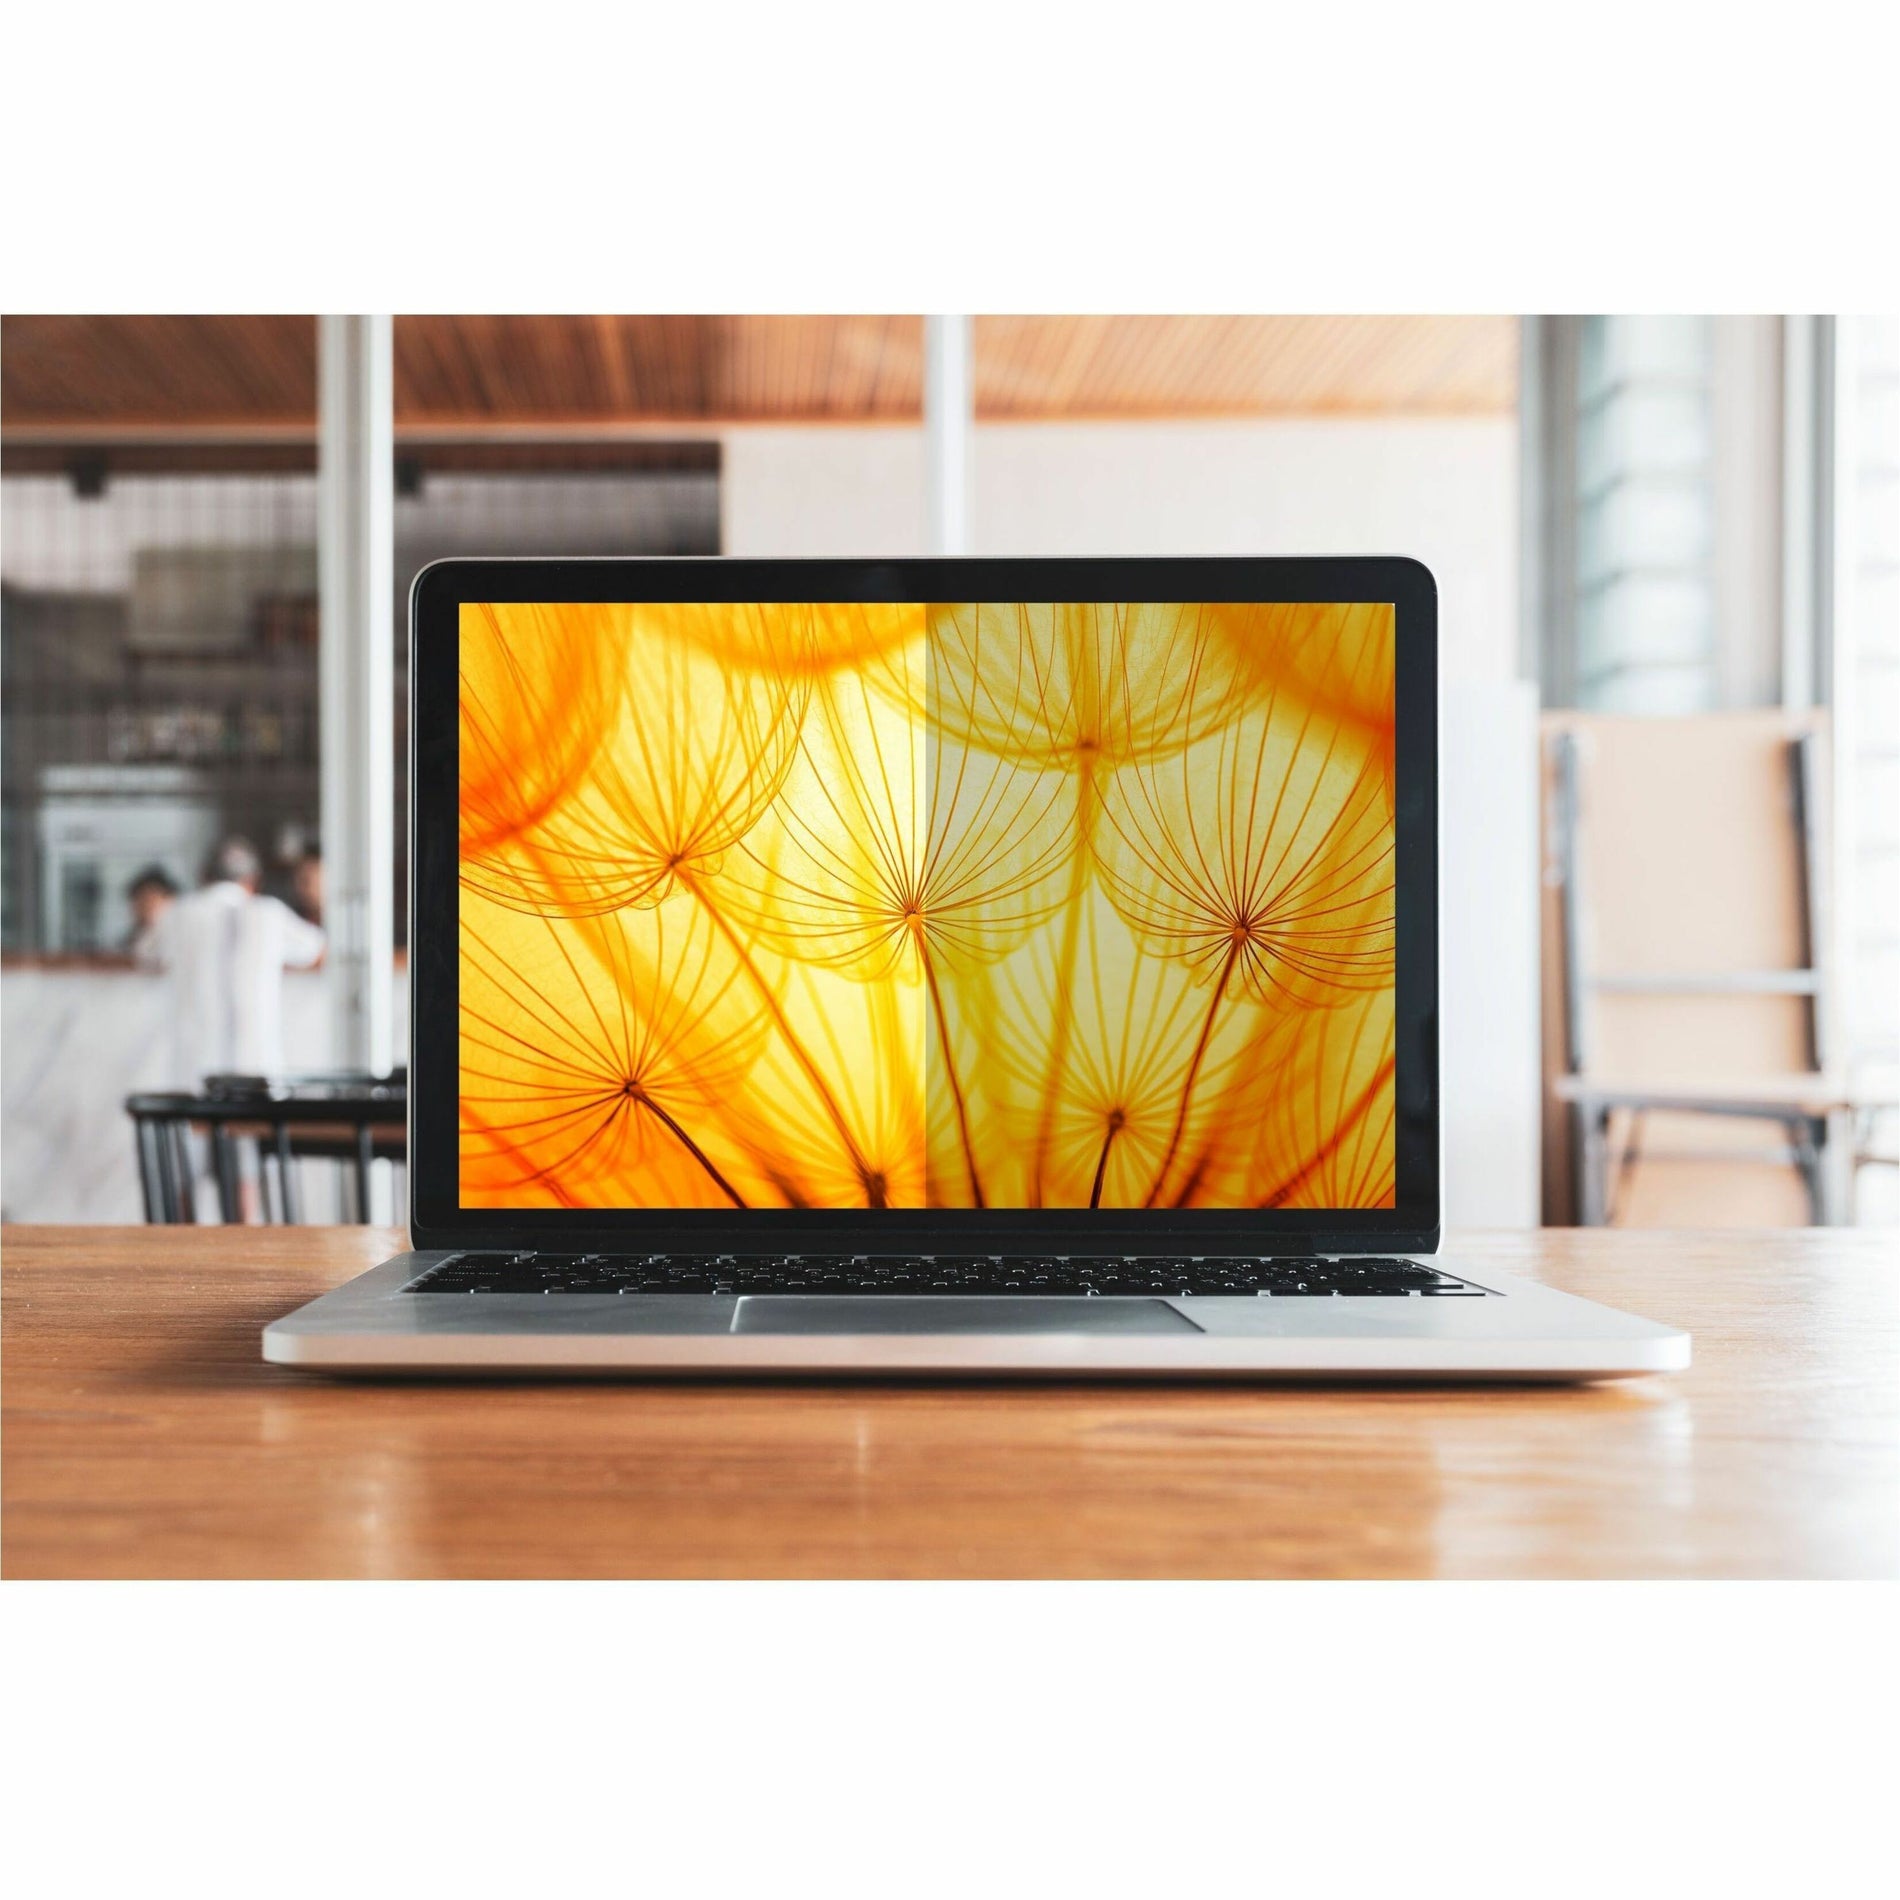 3M BP156W9E Bright Screen Privacy Filter for 15.6in Full Screen Laptop, 16:9, Ultra Slim, Blue Light Reduction